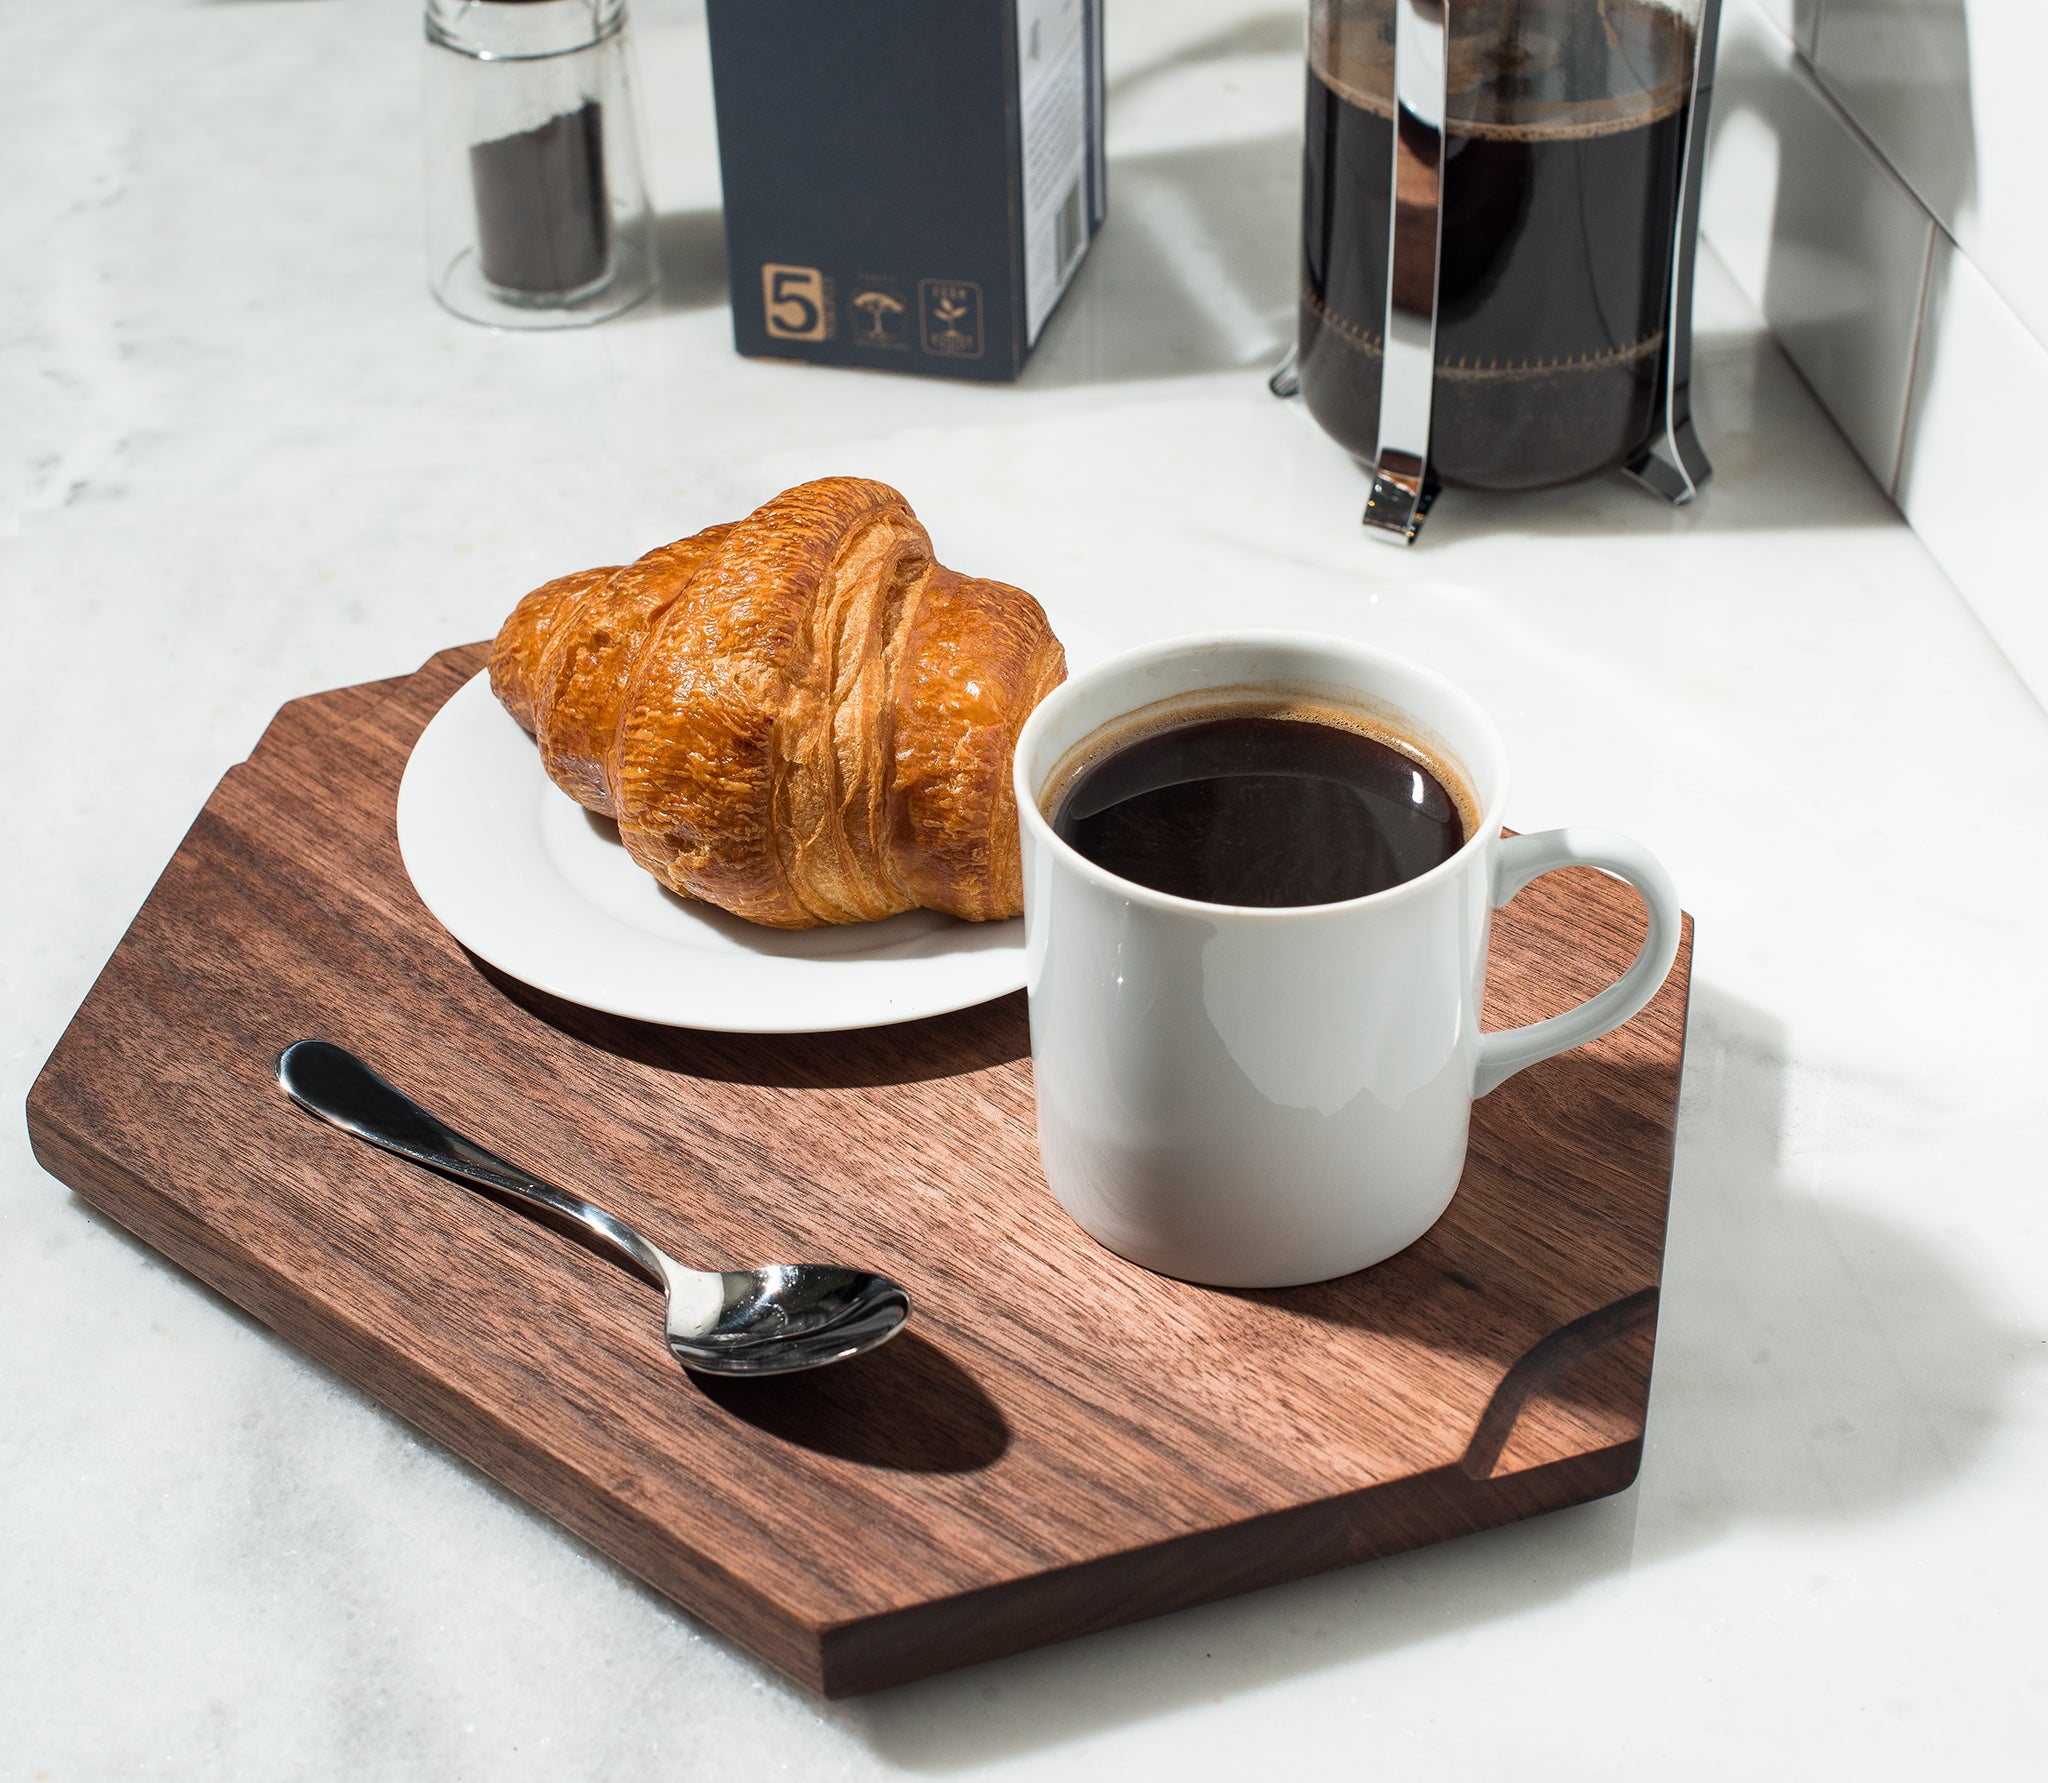 Coffee and a croissant is pure happiness. 